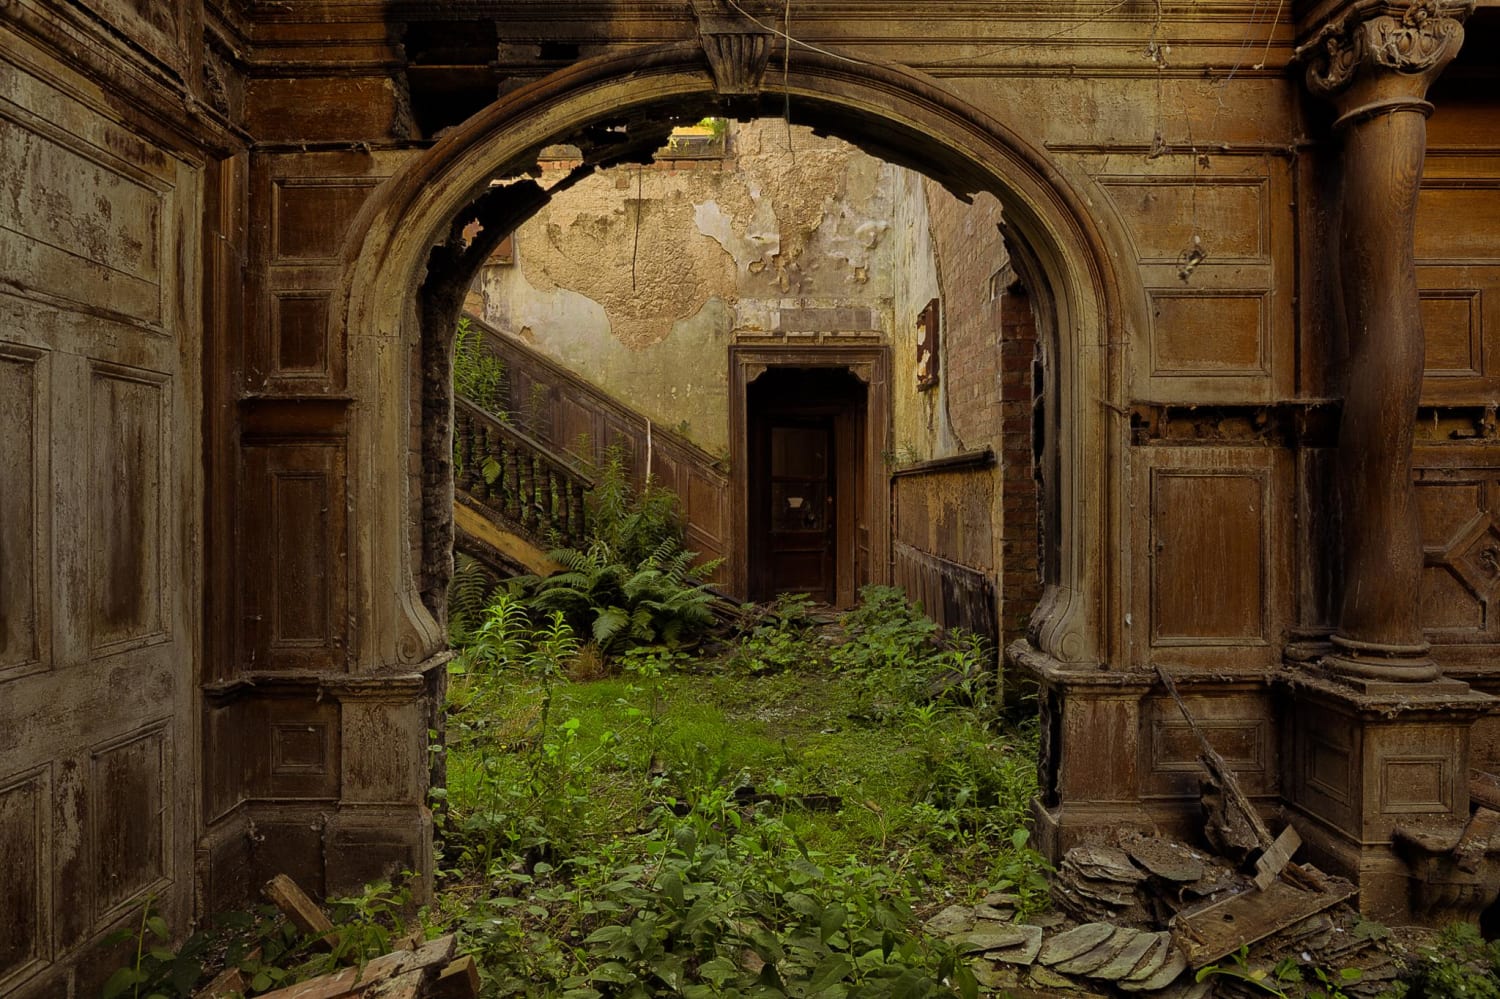 "Arch enemy" An old children's hospital in Scotland where nature has taken a hold. Before being a hospital it was home to same engineer who designed the London tower bridge.